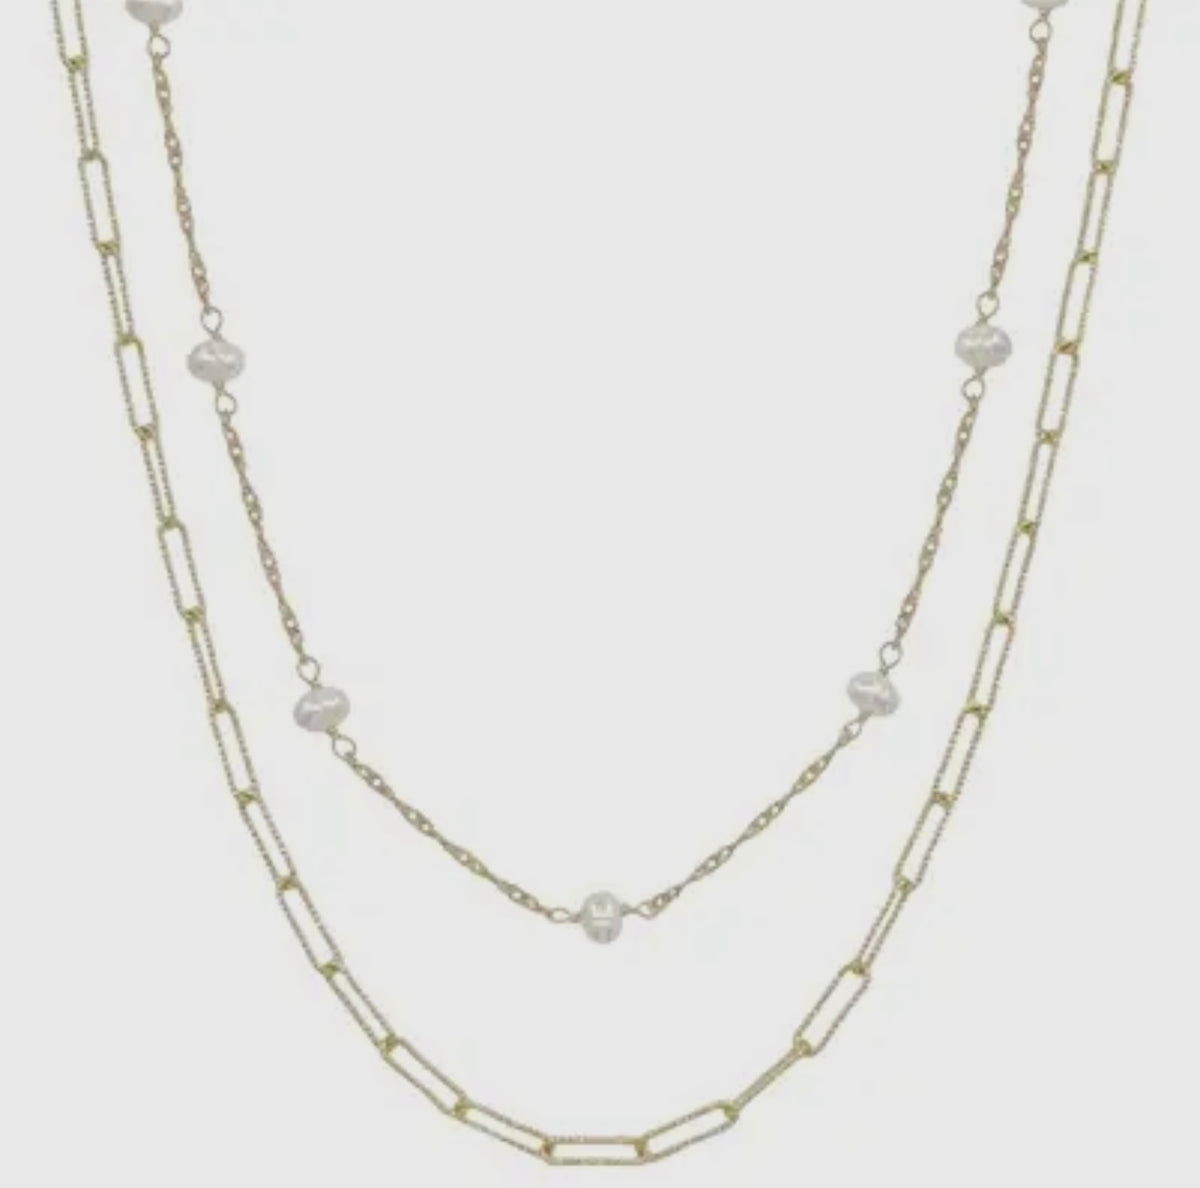 Gold Link Chain & Pearl Chain Double Necklace